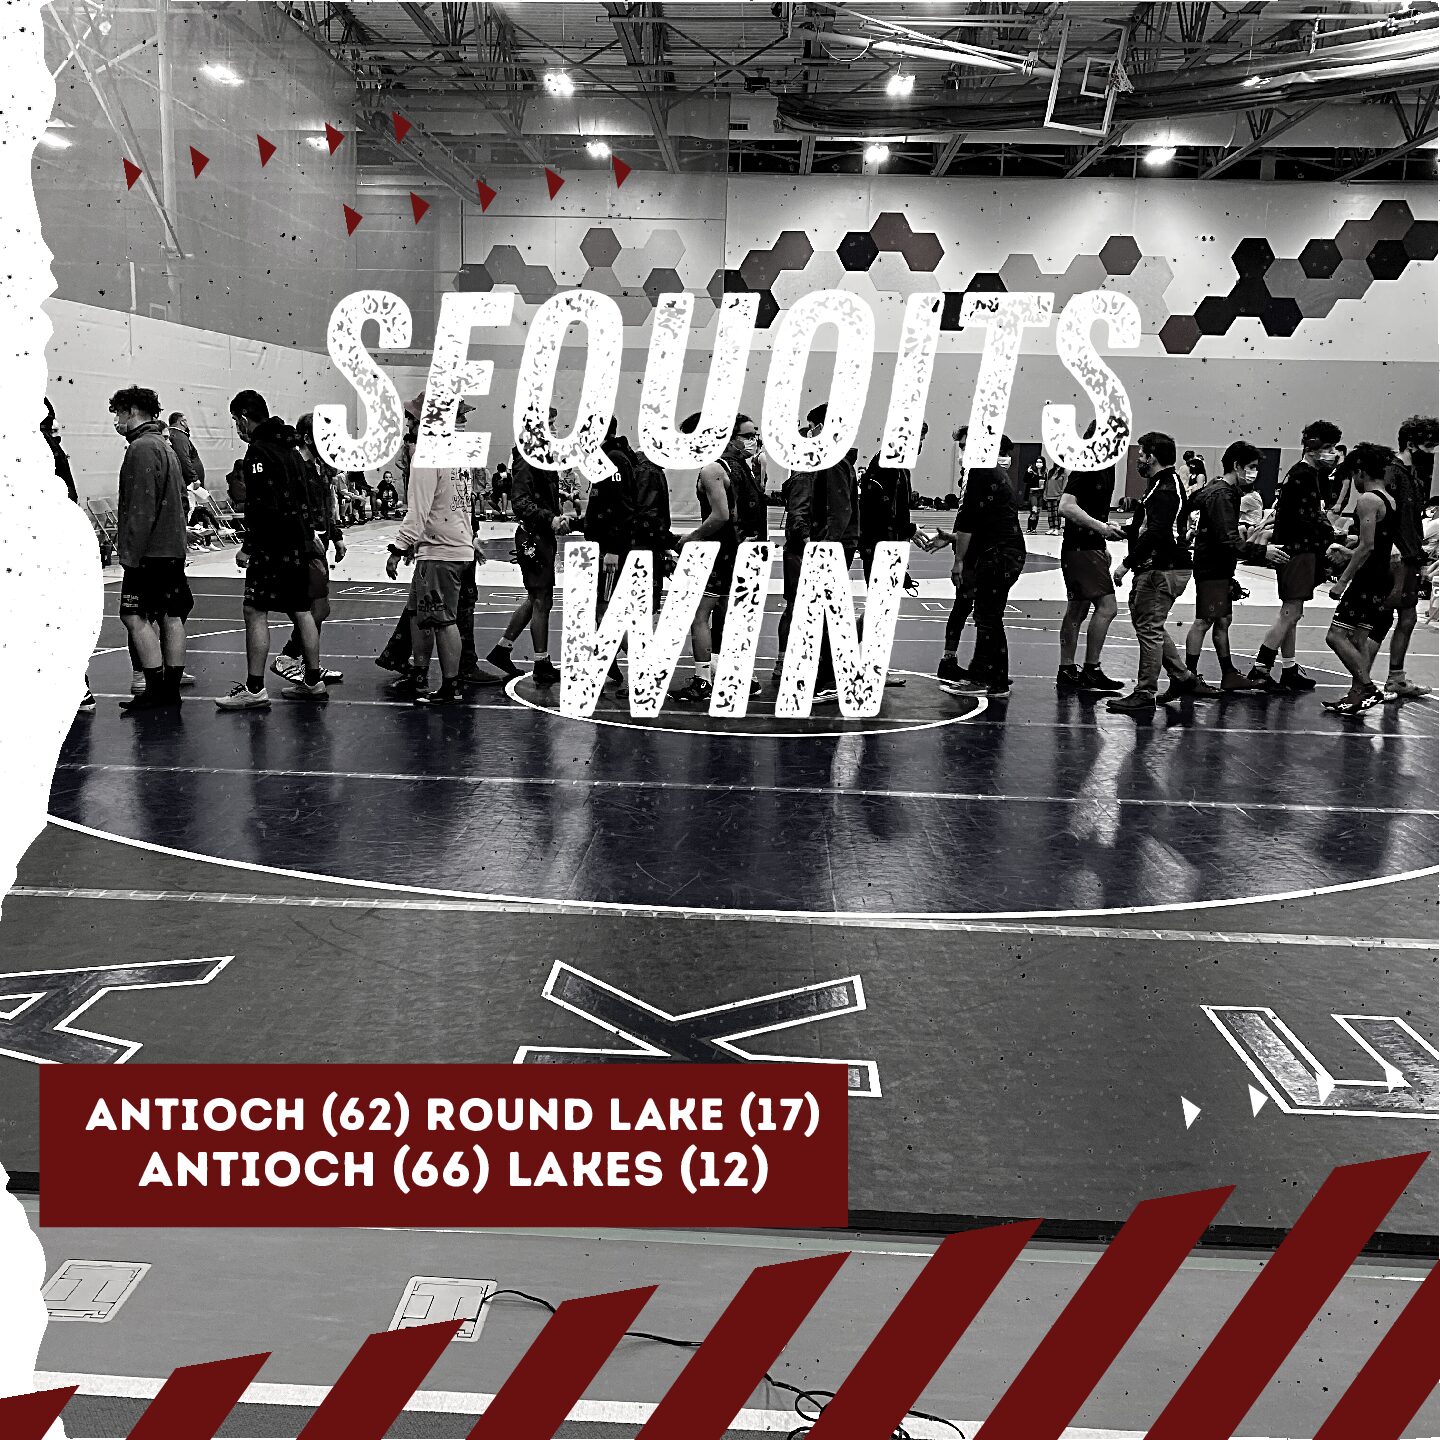 Antioch defeated Lakes and Round Lake in the first wrestling meet at the new District 117 Fieldhouse.